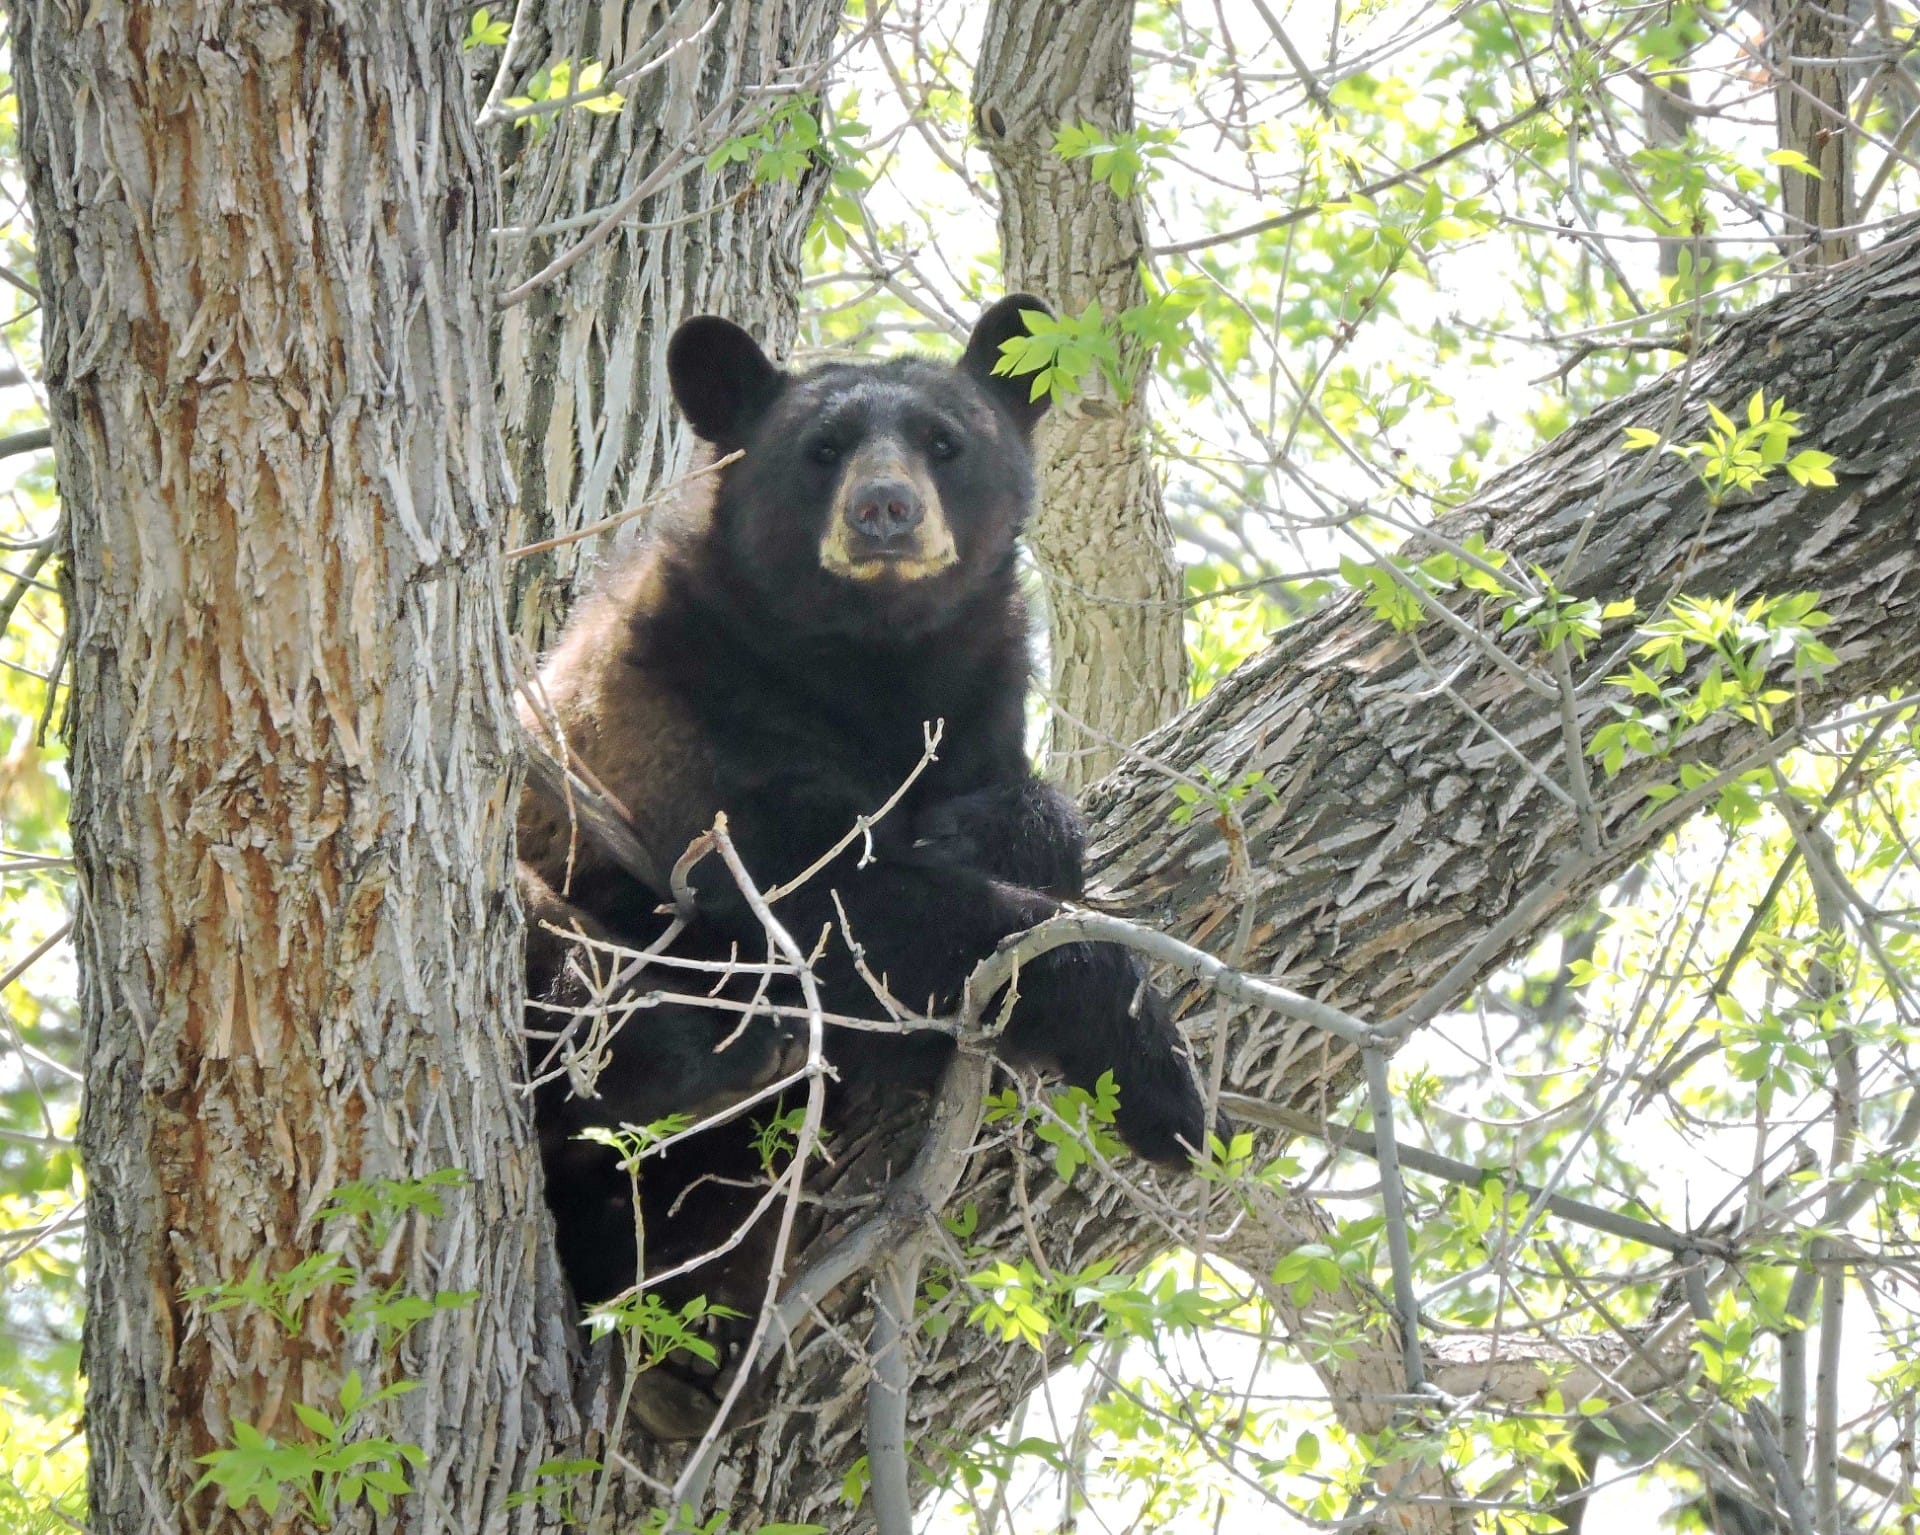 black bear in the crook of a tree, looking at the camera